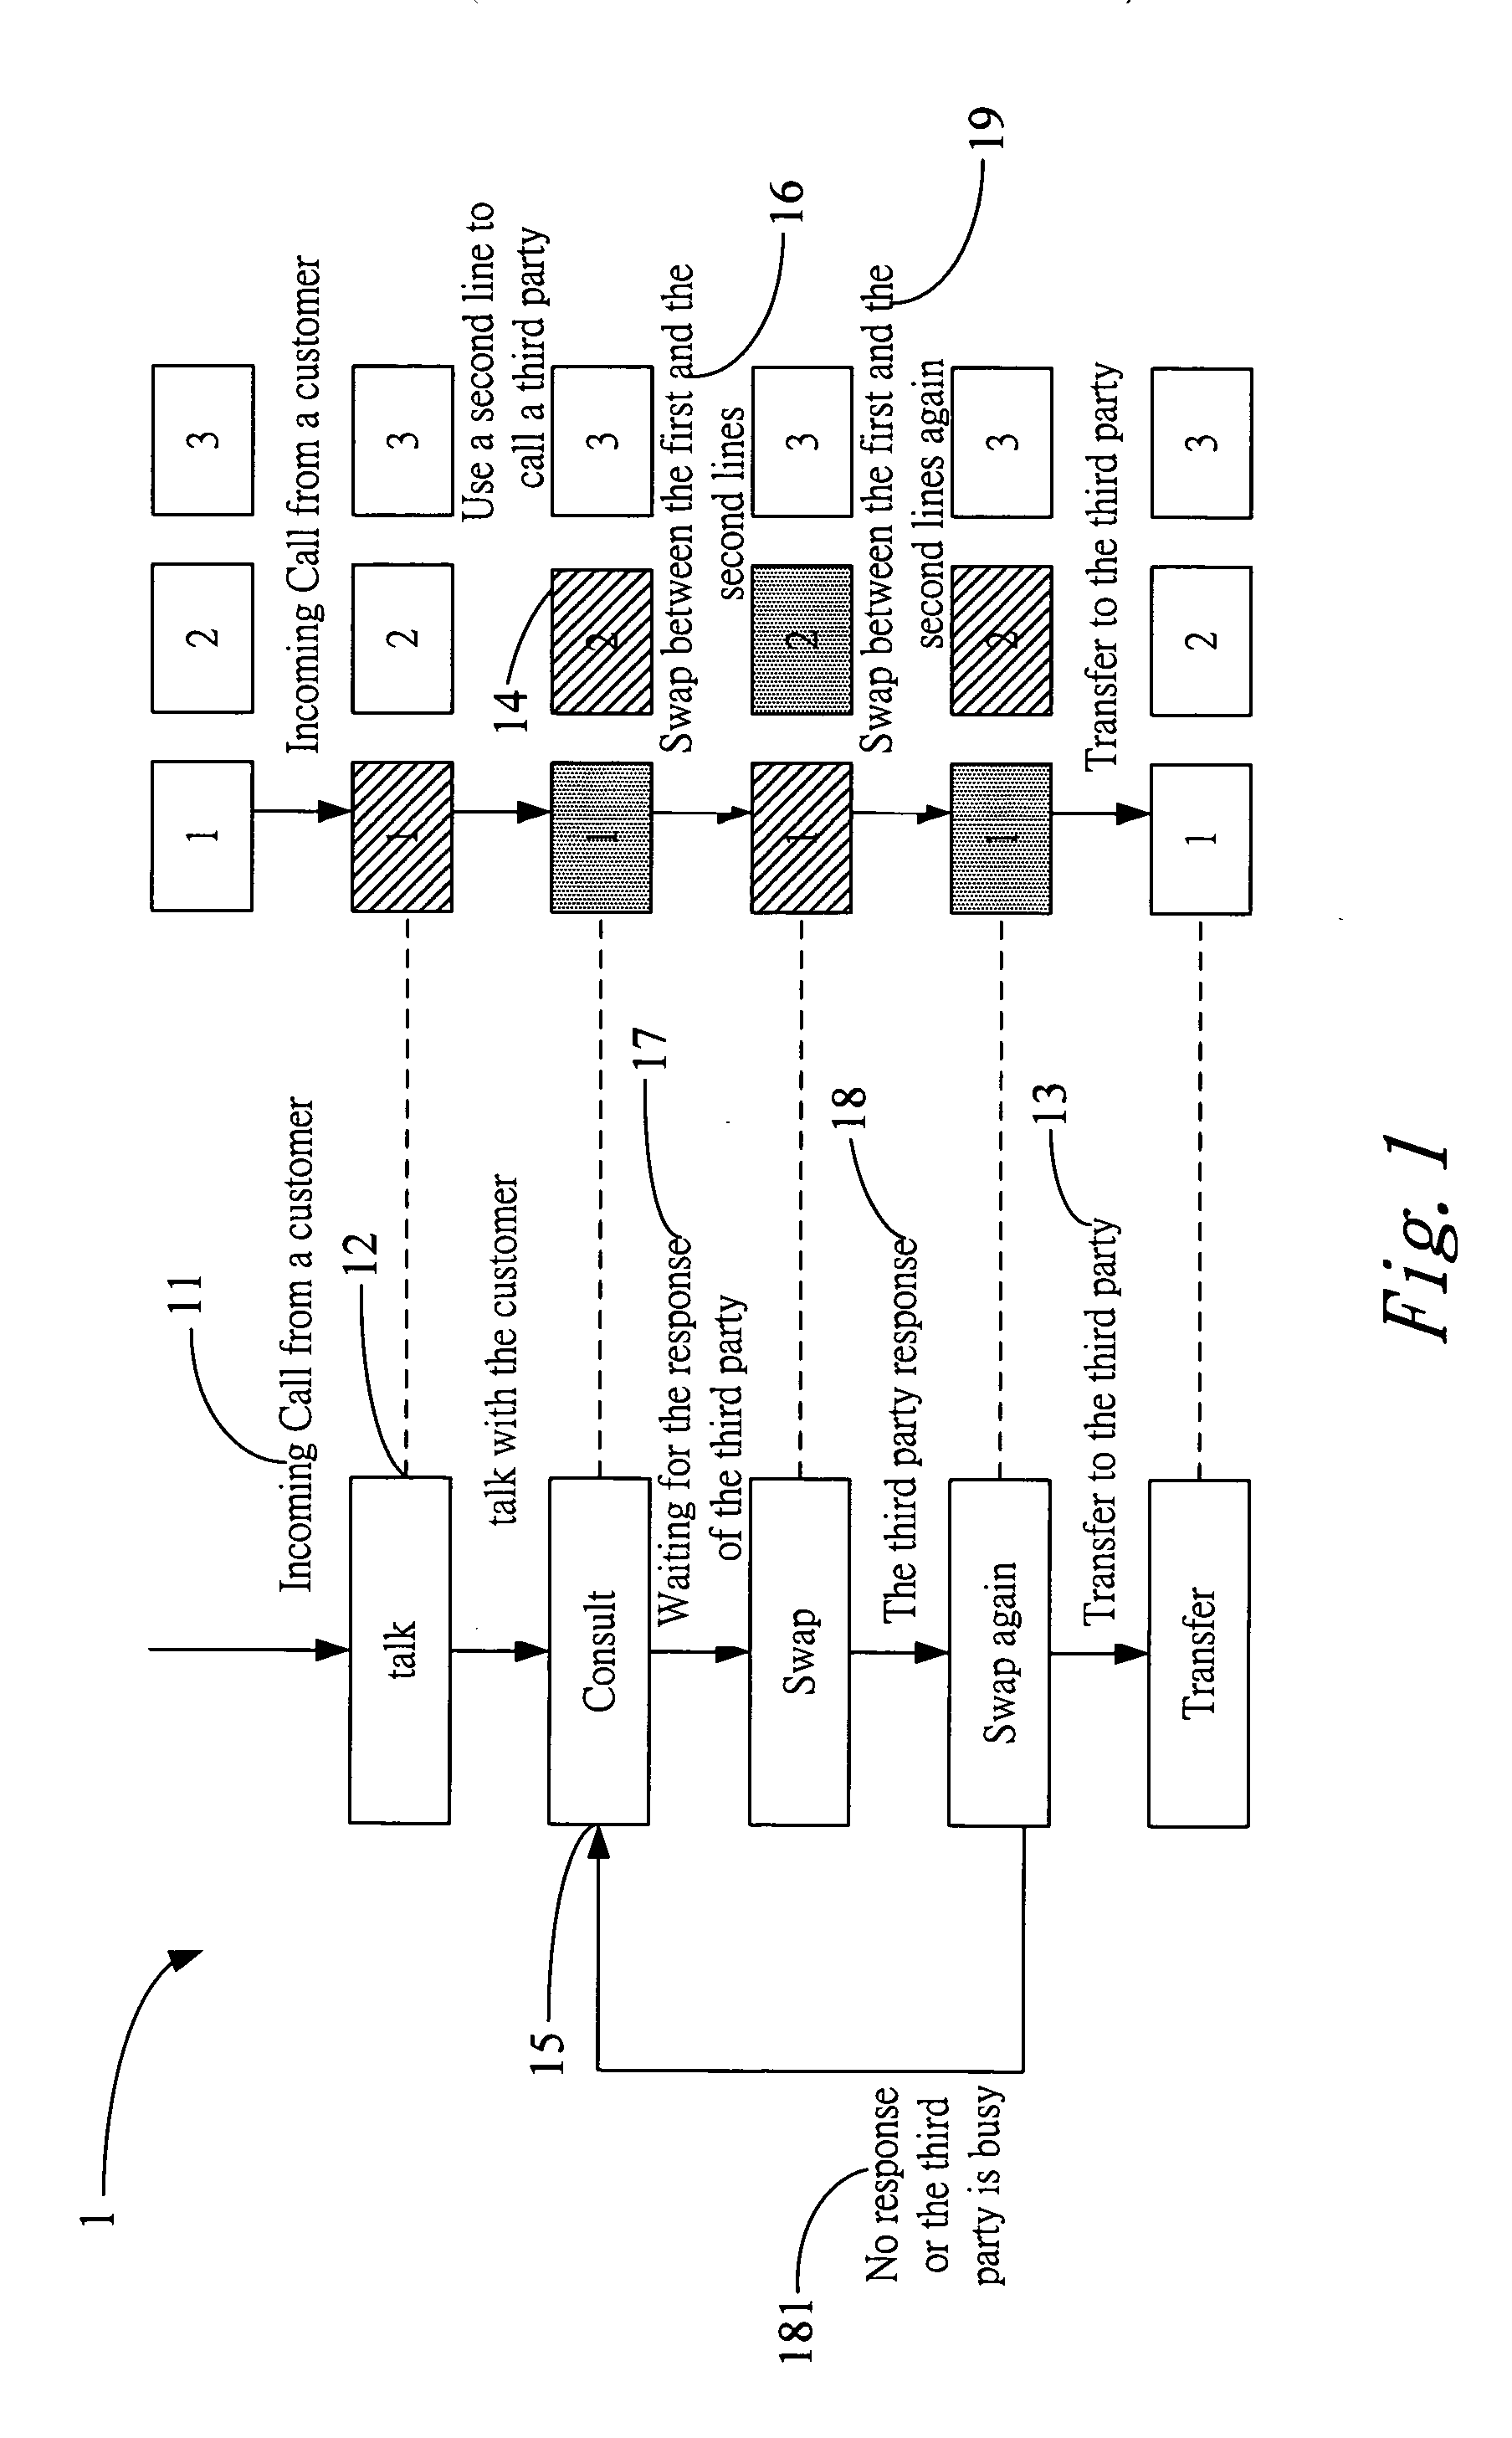 Method for automatic call-transfer using a softphone